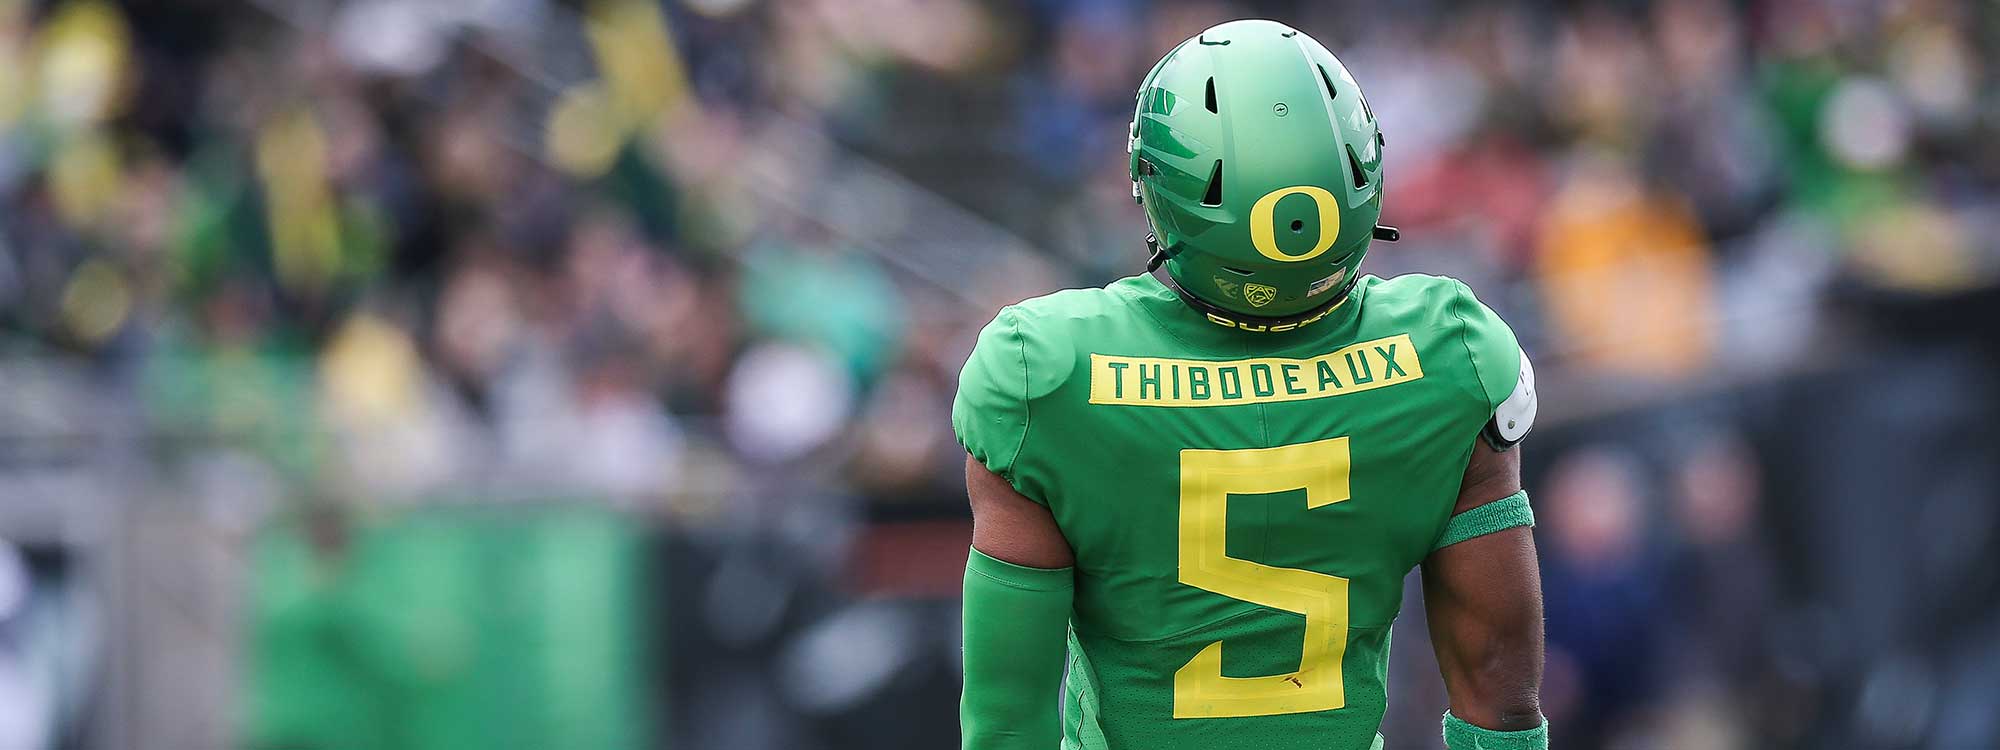 Kayvon Thibodeaux in his Oregon football uniform after a play